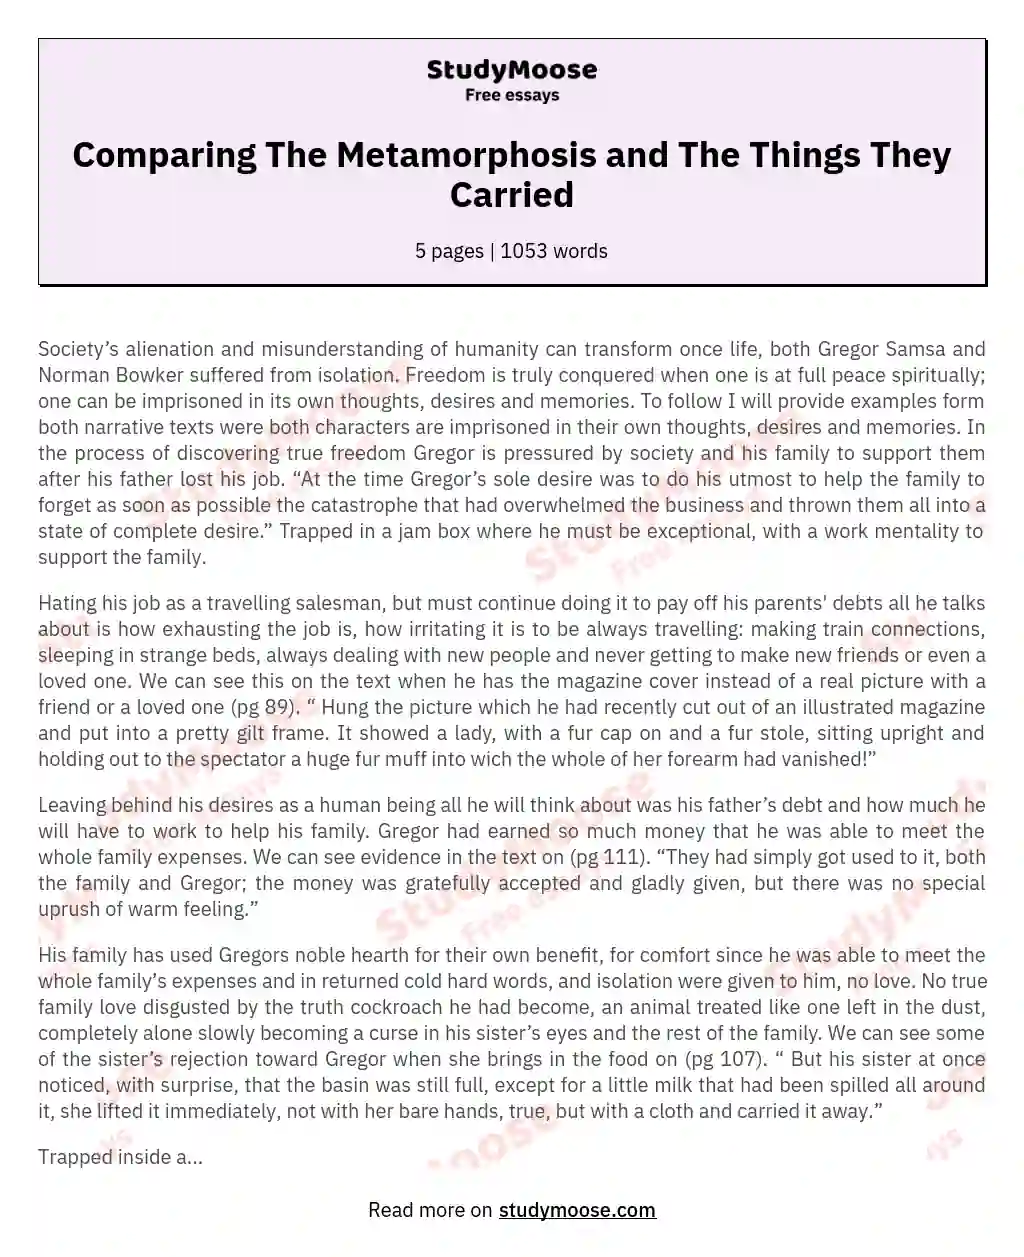 A compare and contrast Analysis of "The Metamorphosis" and "The Things They Carried"